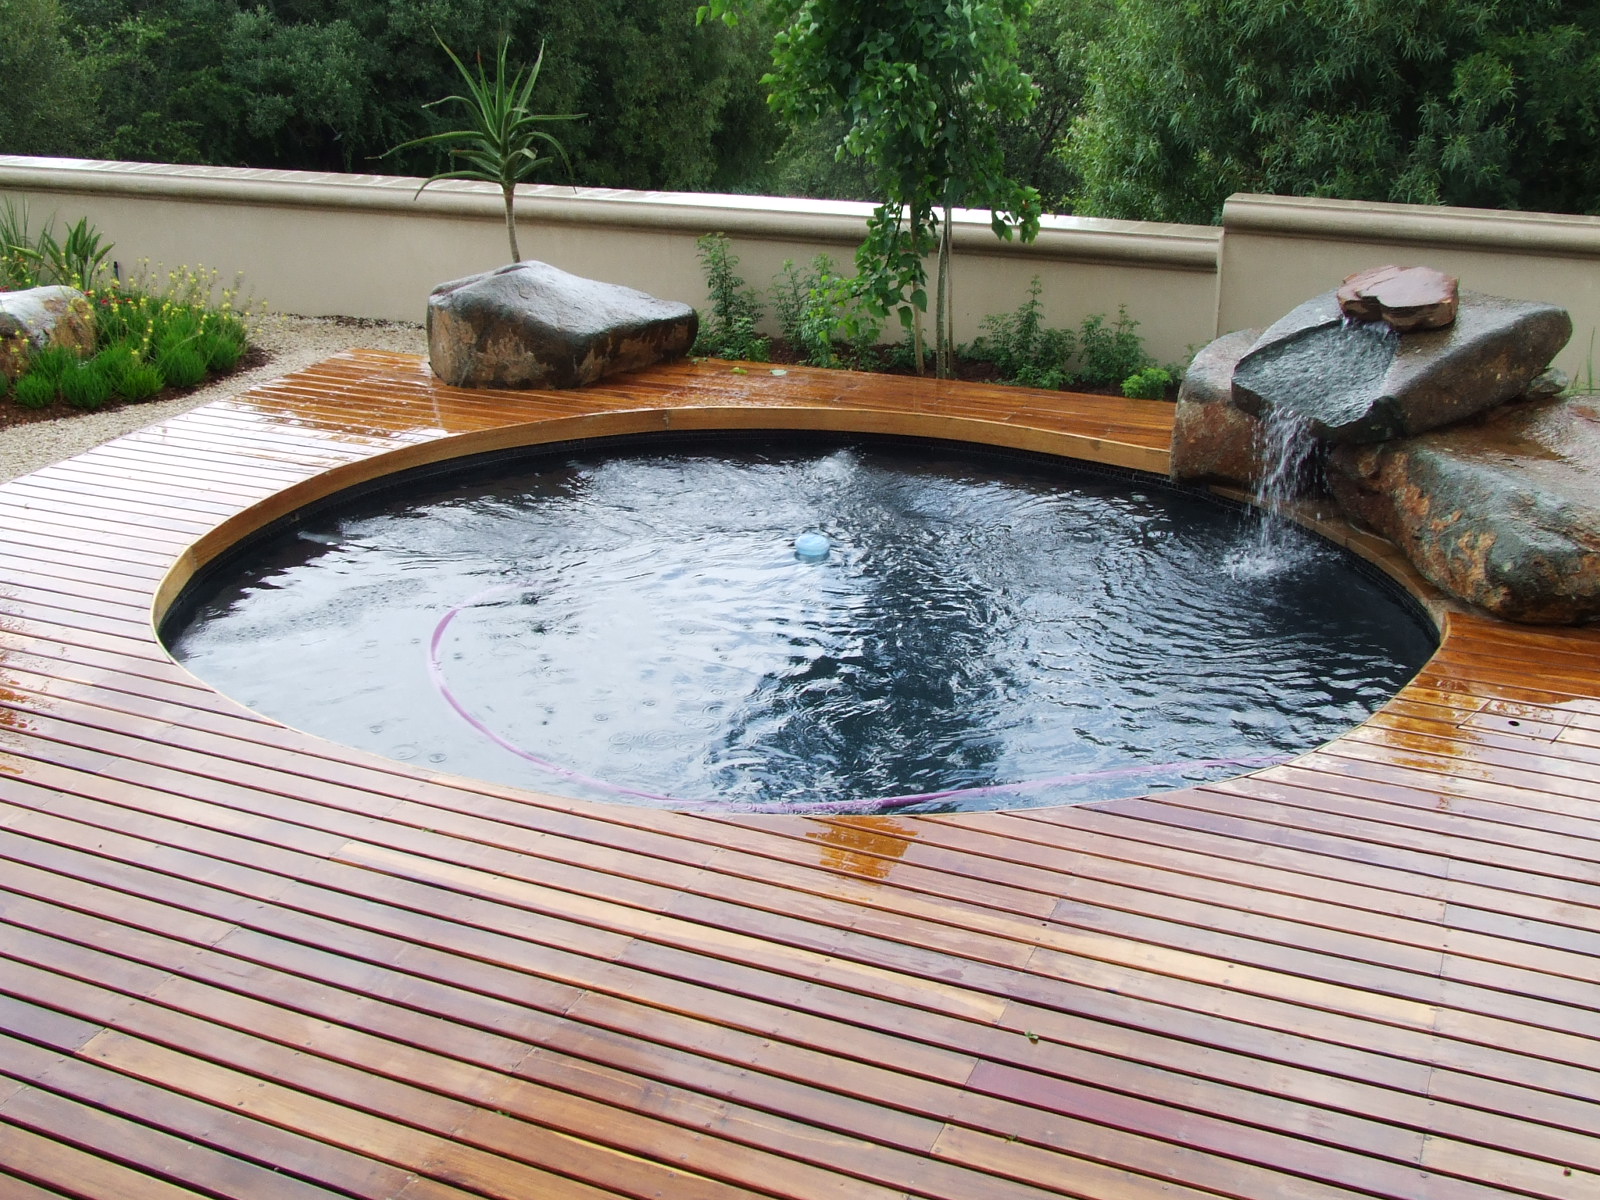 Cool Design Ideas With Varnished Wooden Deck Round Shape Green Plant And Grass Cute Small Waterfall Amazing Stone And Style Of Fence For Outdoor Pool Pool Design